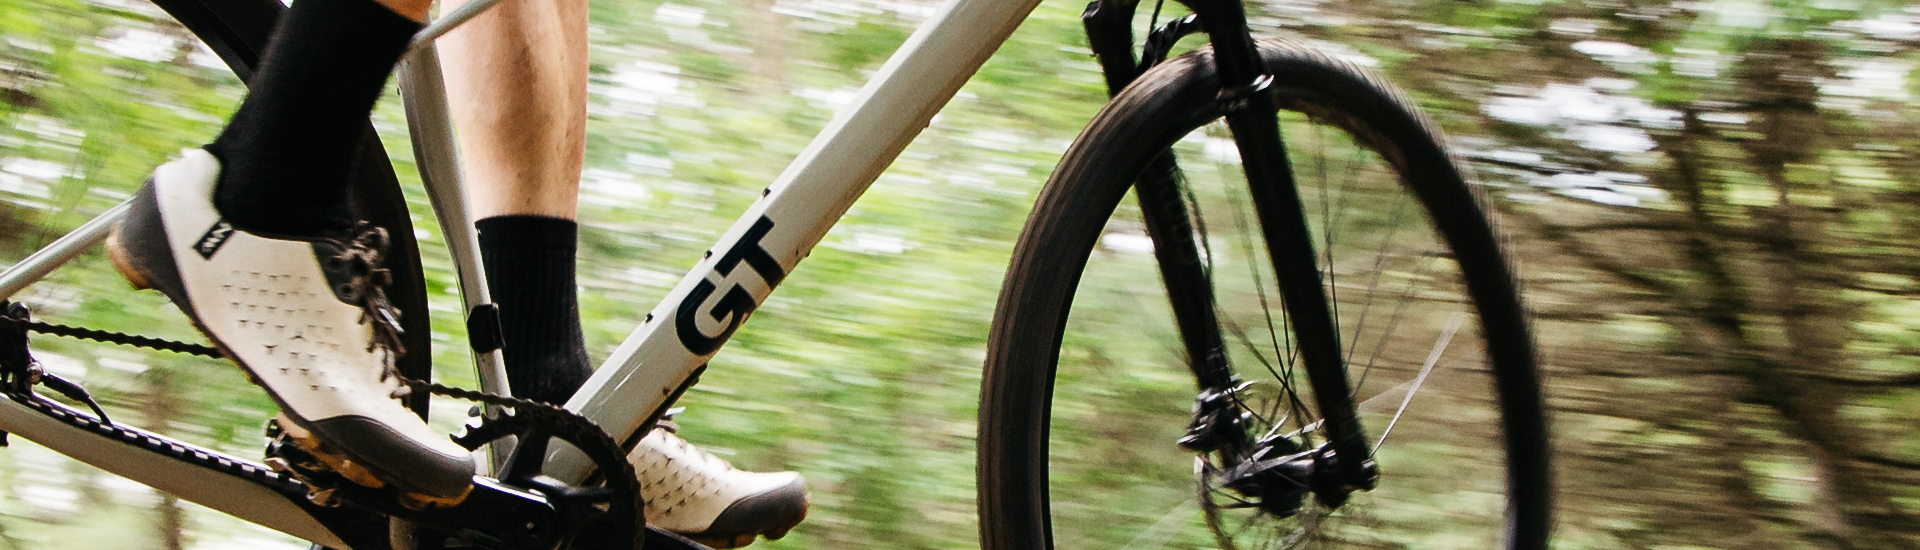 How to choose your new gravel bike